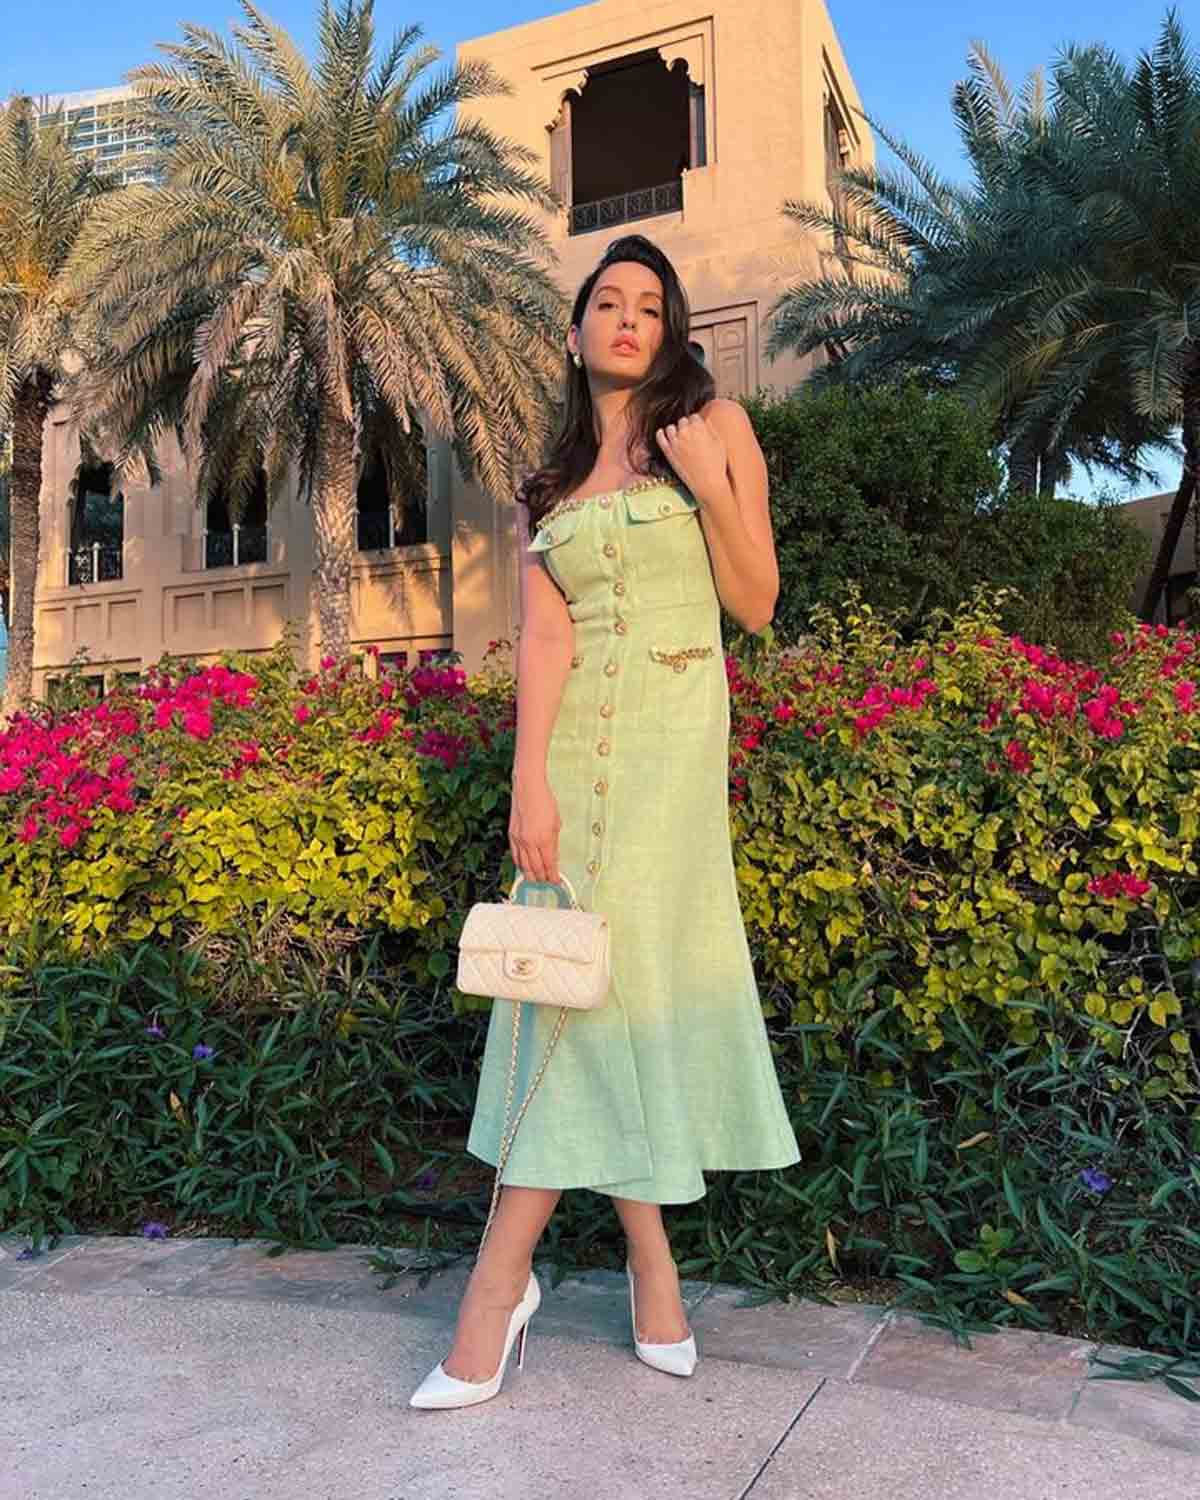 Nora Fatehi Wins Every Monochrome Look With Her Bodycon Dresses And Rs 6.7  Lakh Hermes Kelly Mini Handbag